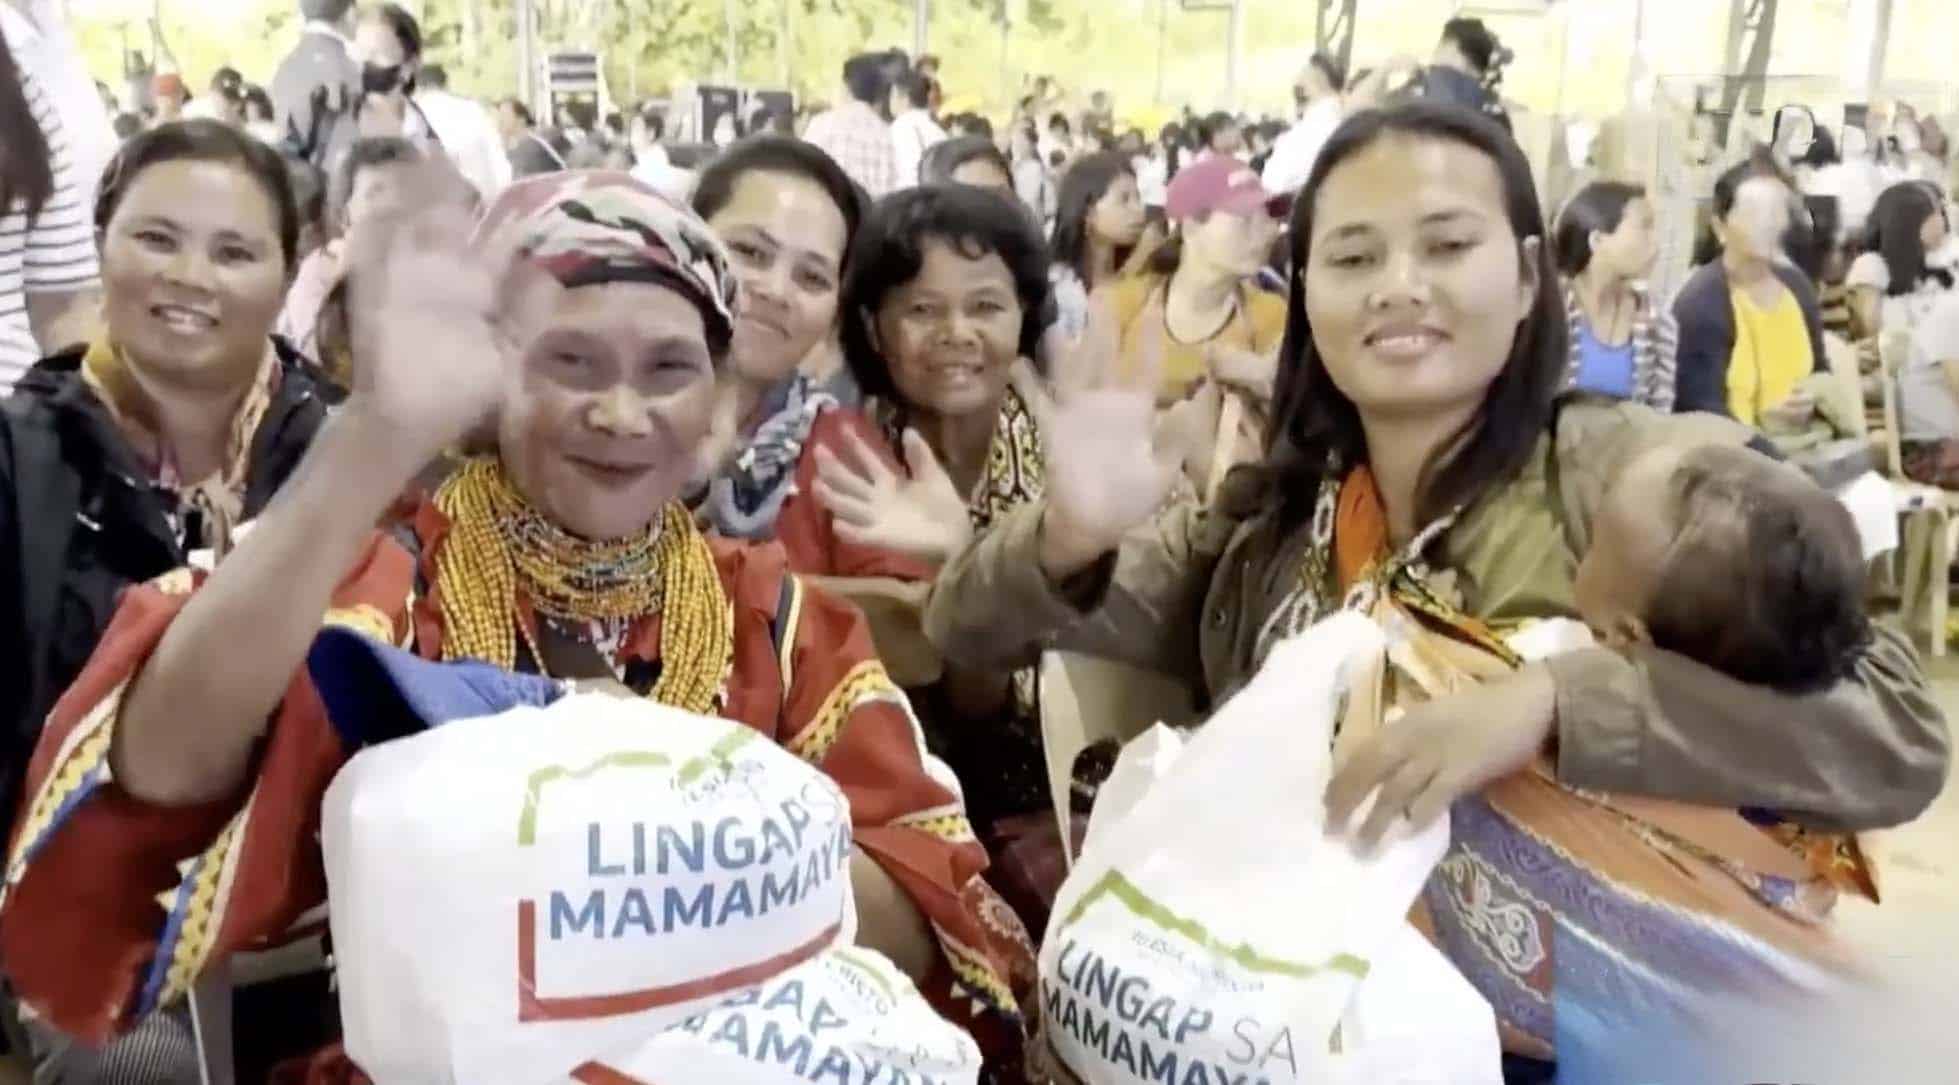 Davao City District reaches out to Matigsalug tribe